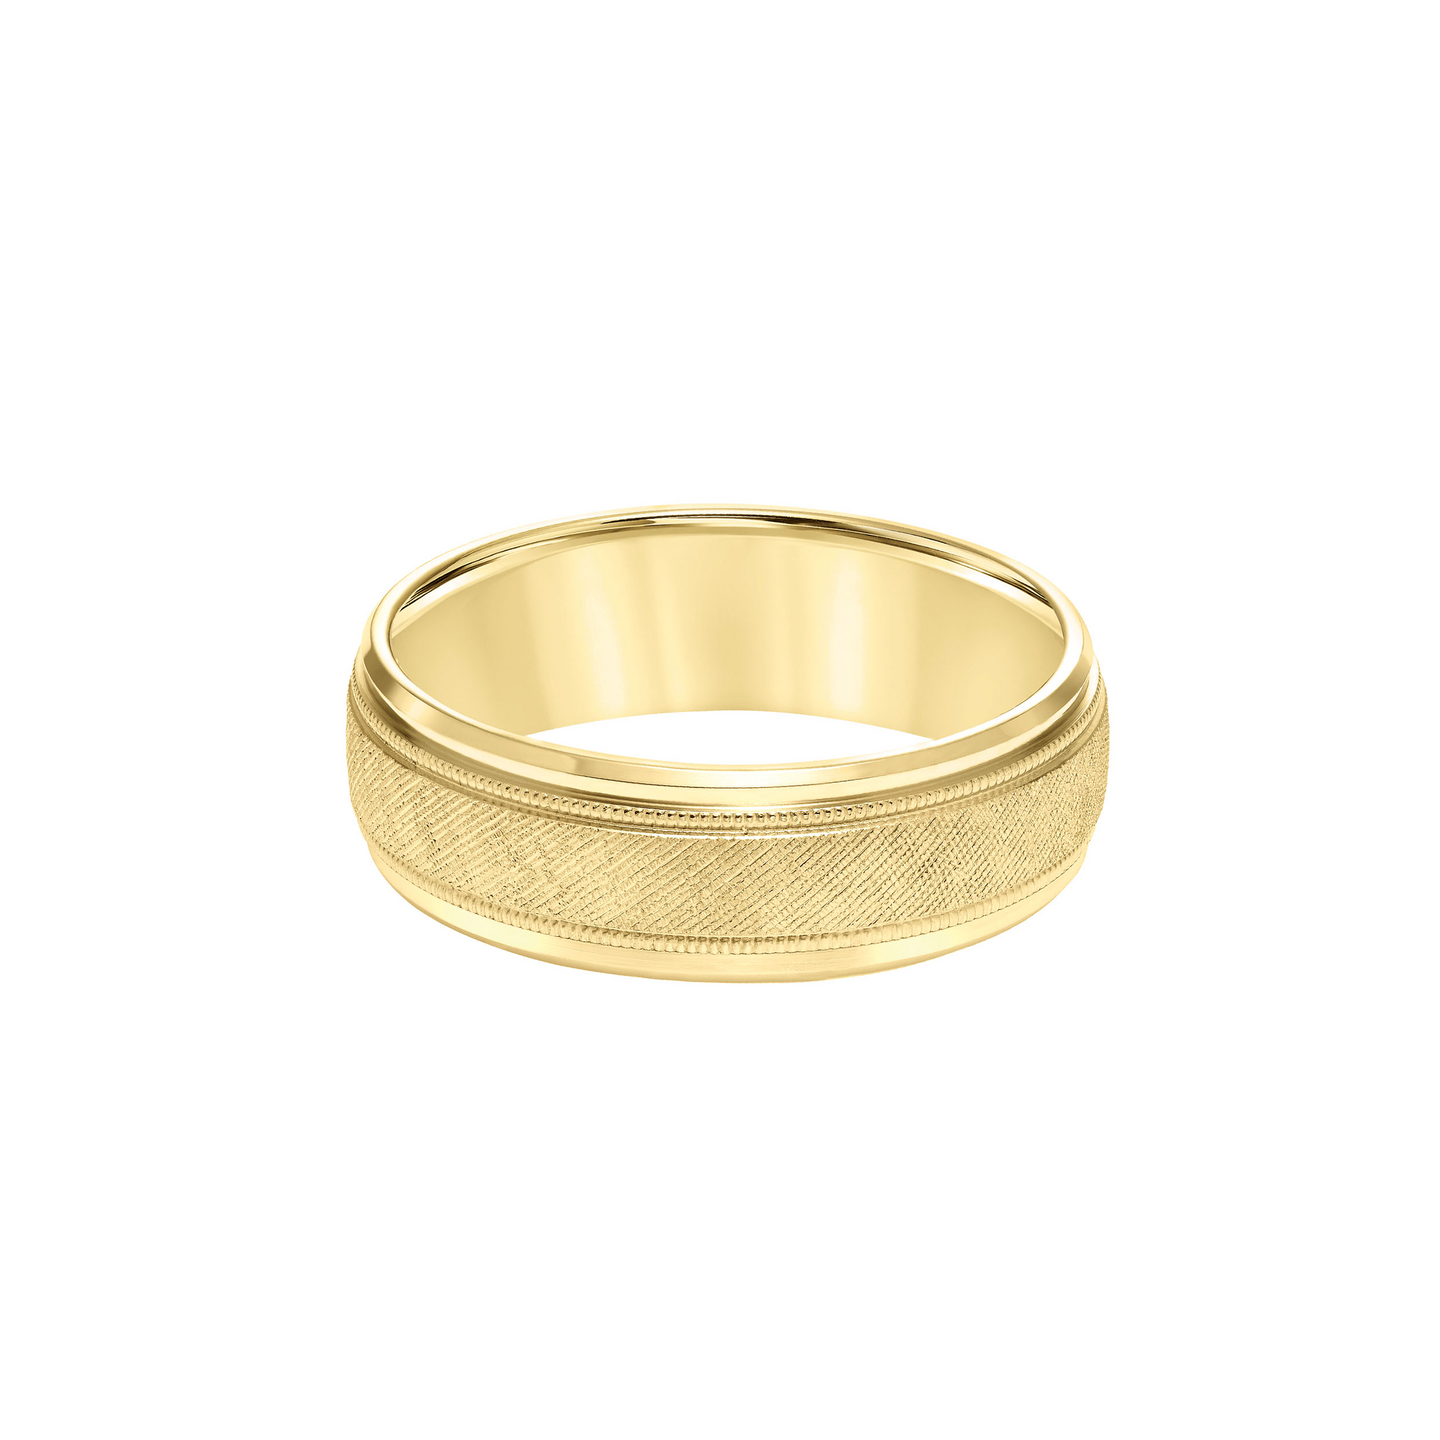 Fink's 14K Yellow Gold Dome Step Edge Engraved Band